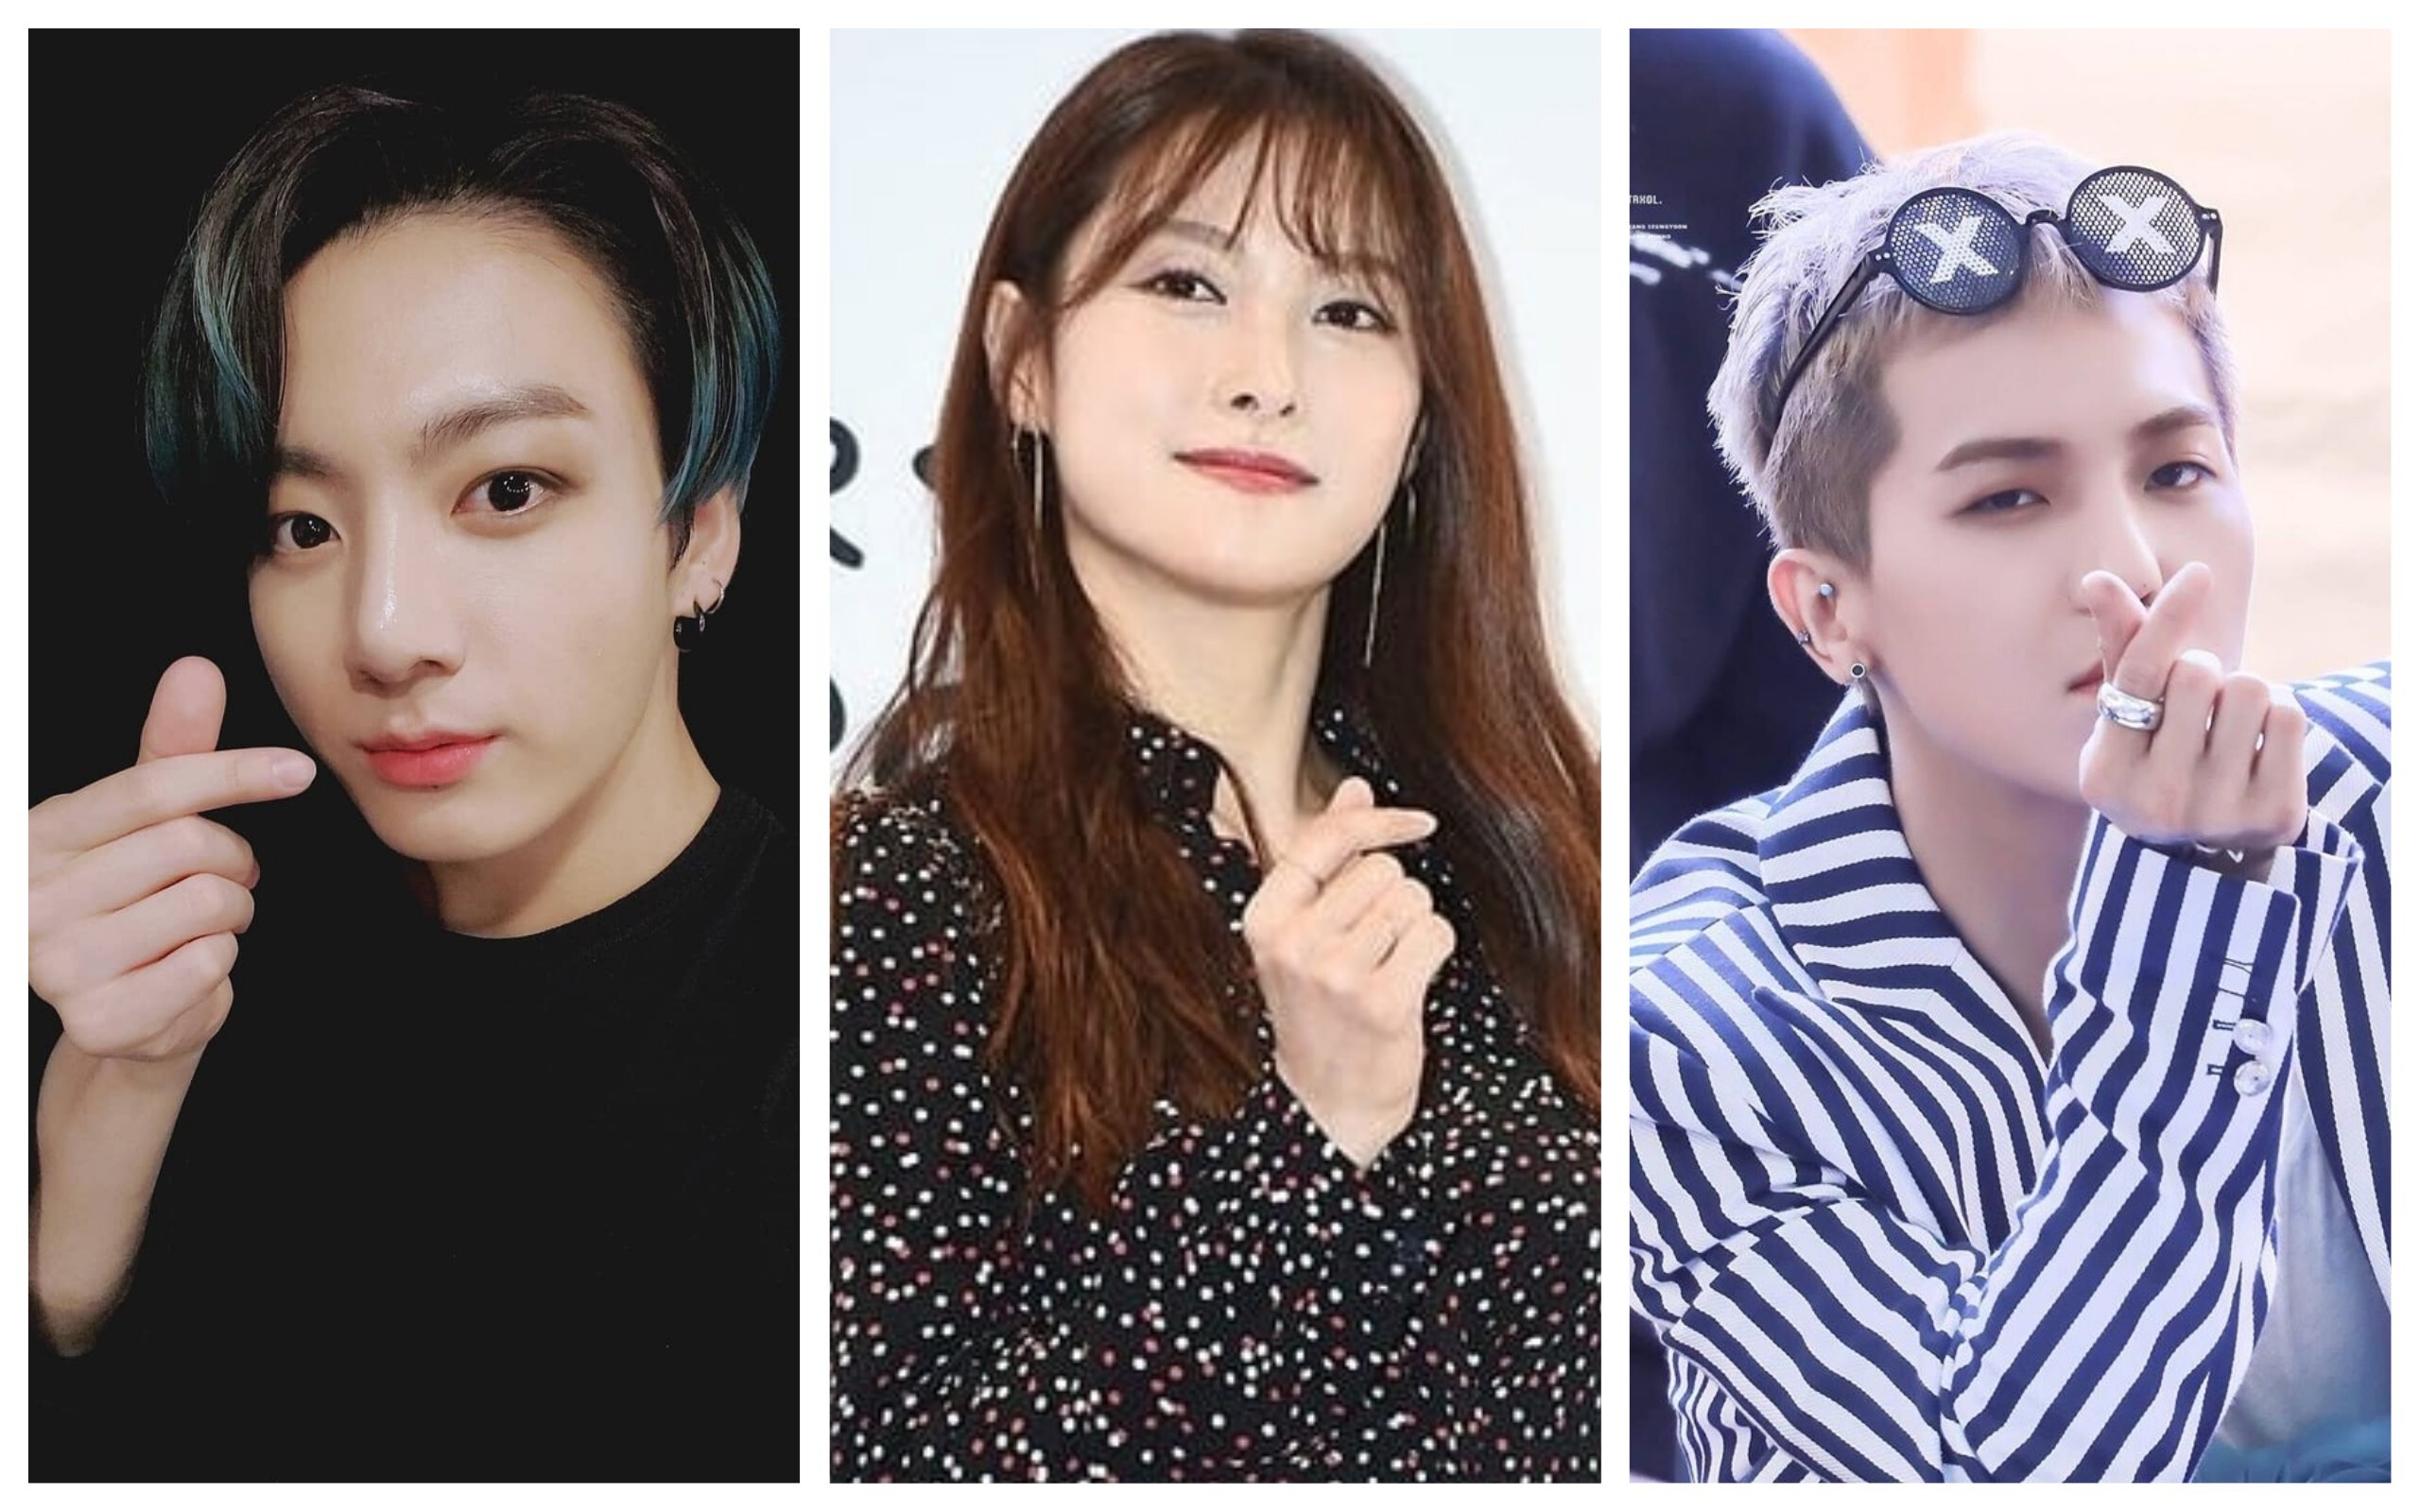 Jungkook, Park Gyu-ri, Song Min-ho: who was spotted partying during the second wave of coronavirus outbreak? Who was falsely accused by over-zealous netizens? Photos: Instagram